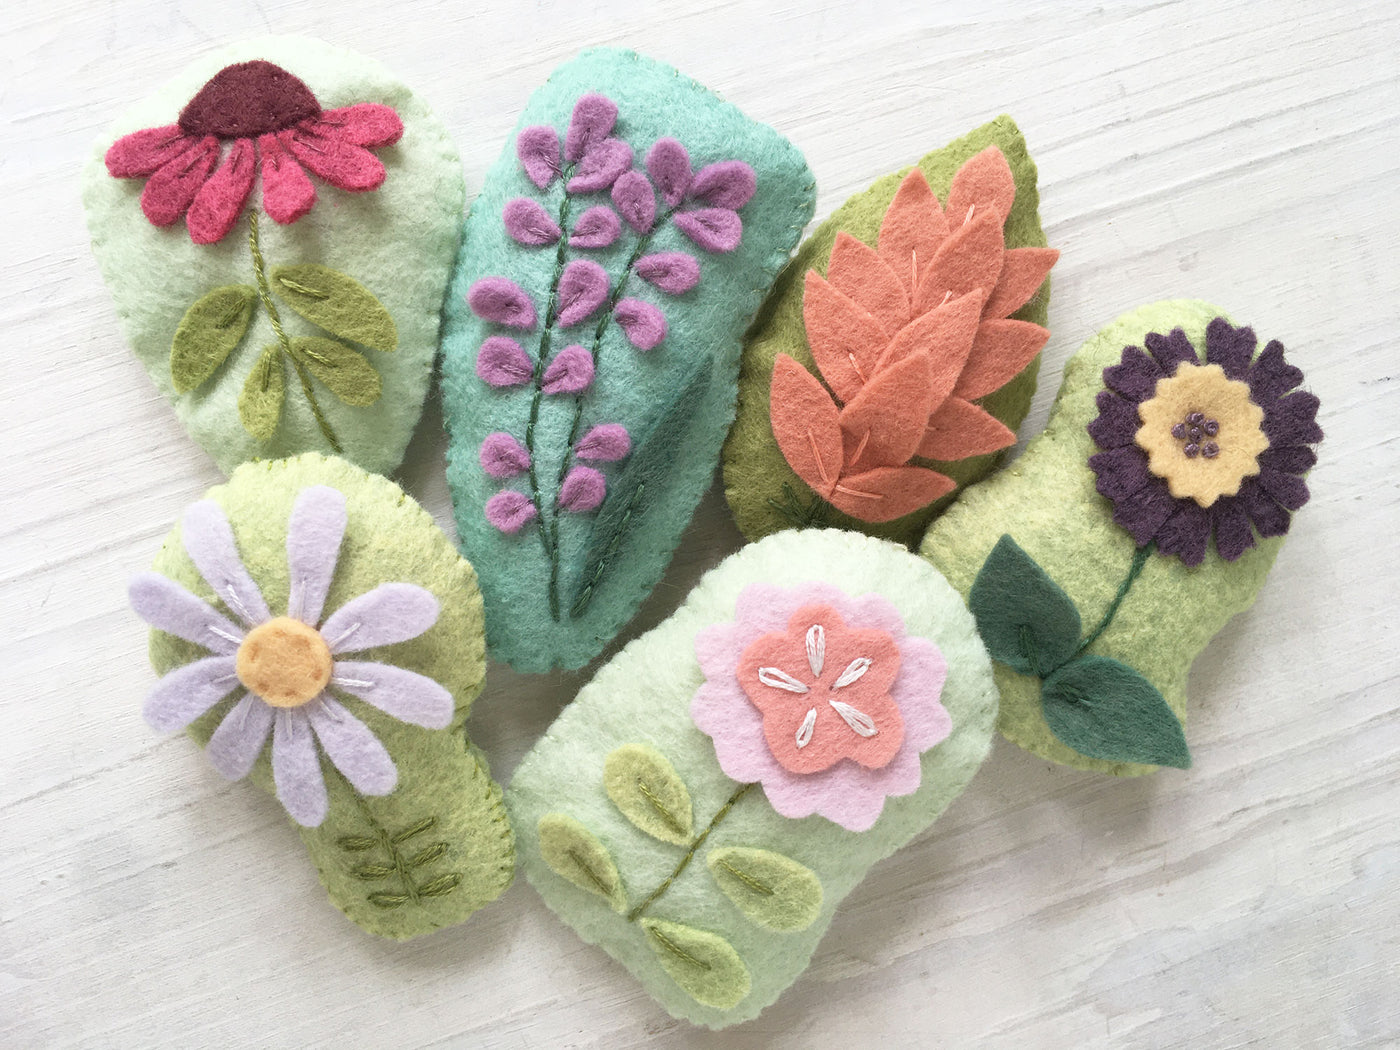 25 x SMALL WOOL BLEND FELT FLOWERS - CHOICE OF COLOURS/CRAFTS/APPLIQUE